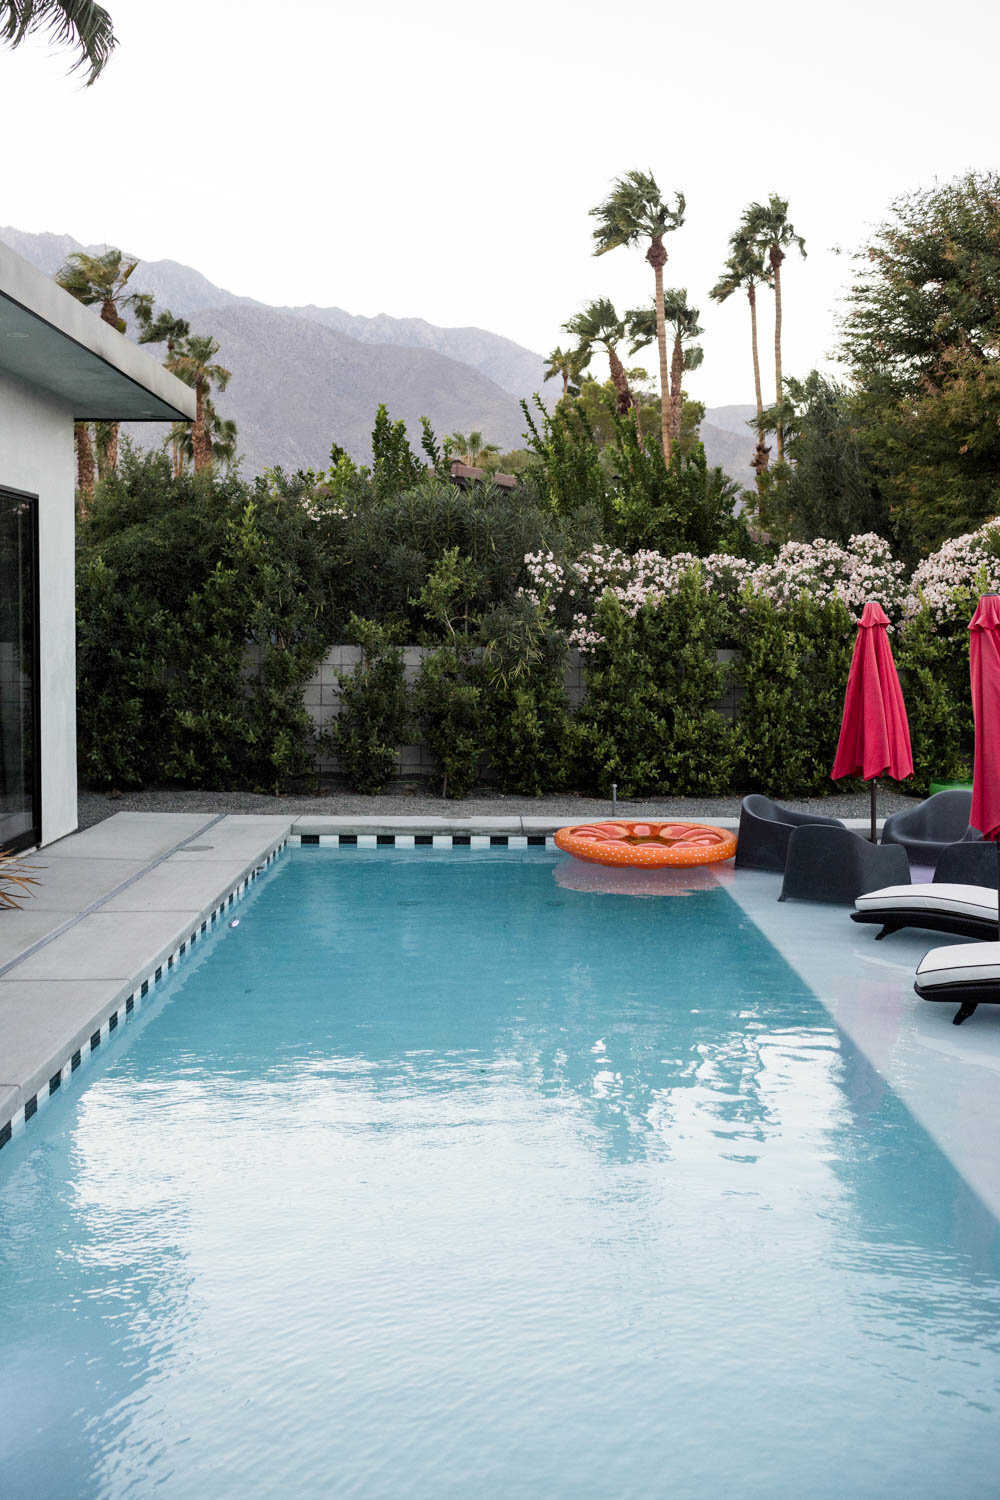 Pool and palm trees in Palm Springs by Danielle Motif Photography